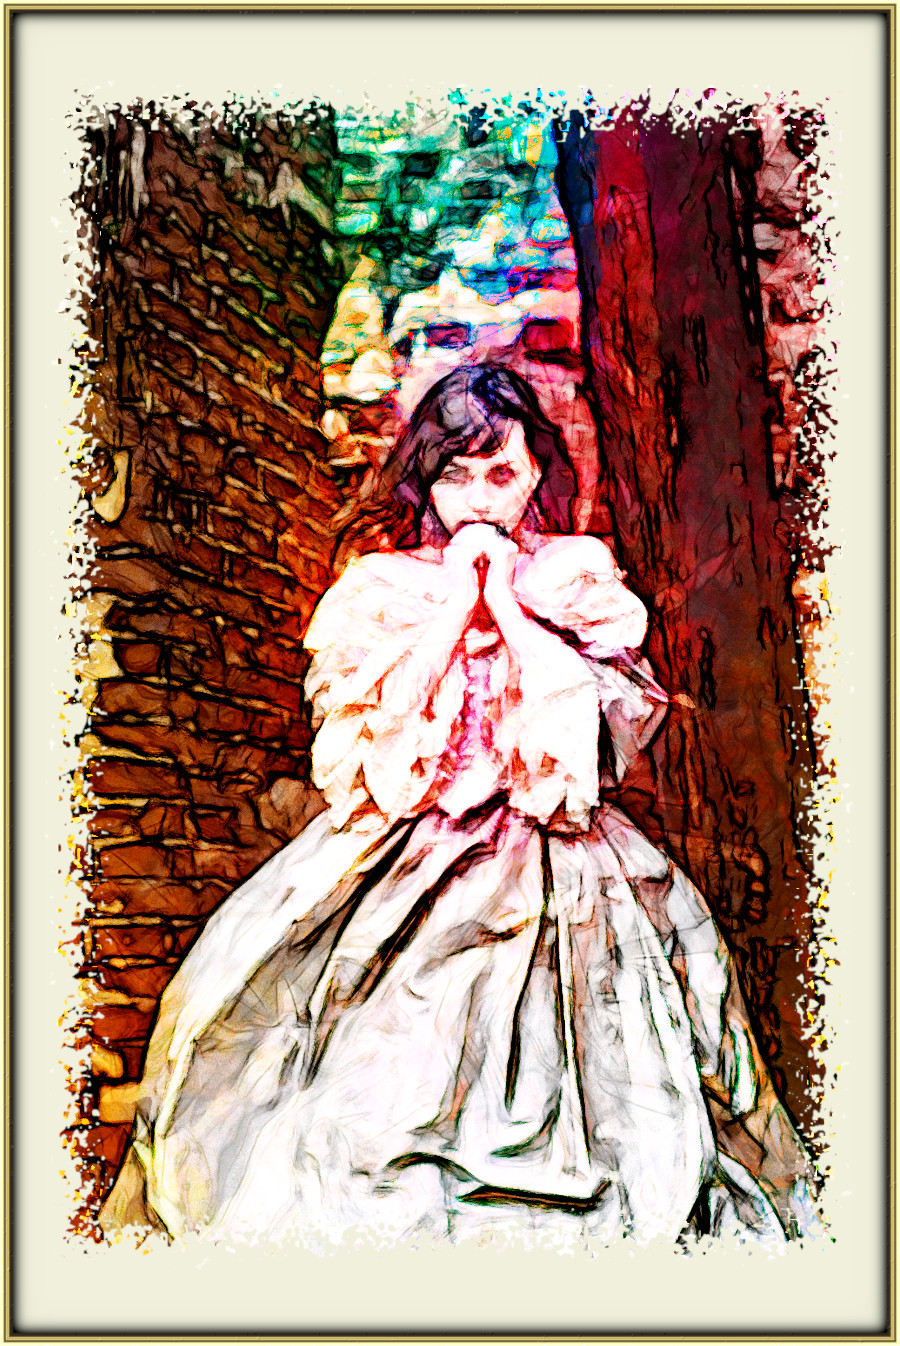 2024-01-22 19-24-27 countess_v_by_ann_emerald_stock_d52mhxo-fullview with a WaterSketch Effect 2024 (100.0,16.0,100.0,0.0,1,15.0,-1.0,6-1.0,4,0).jpeg